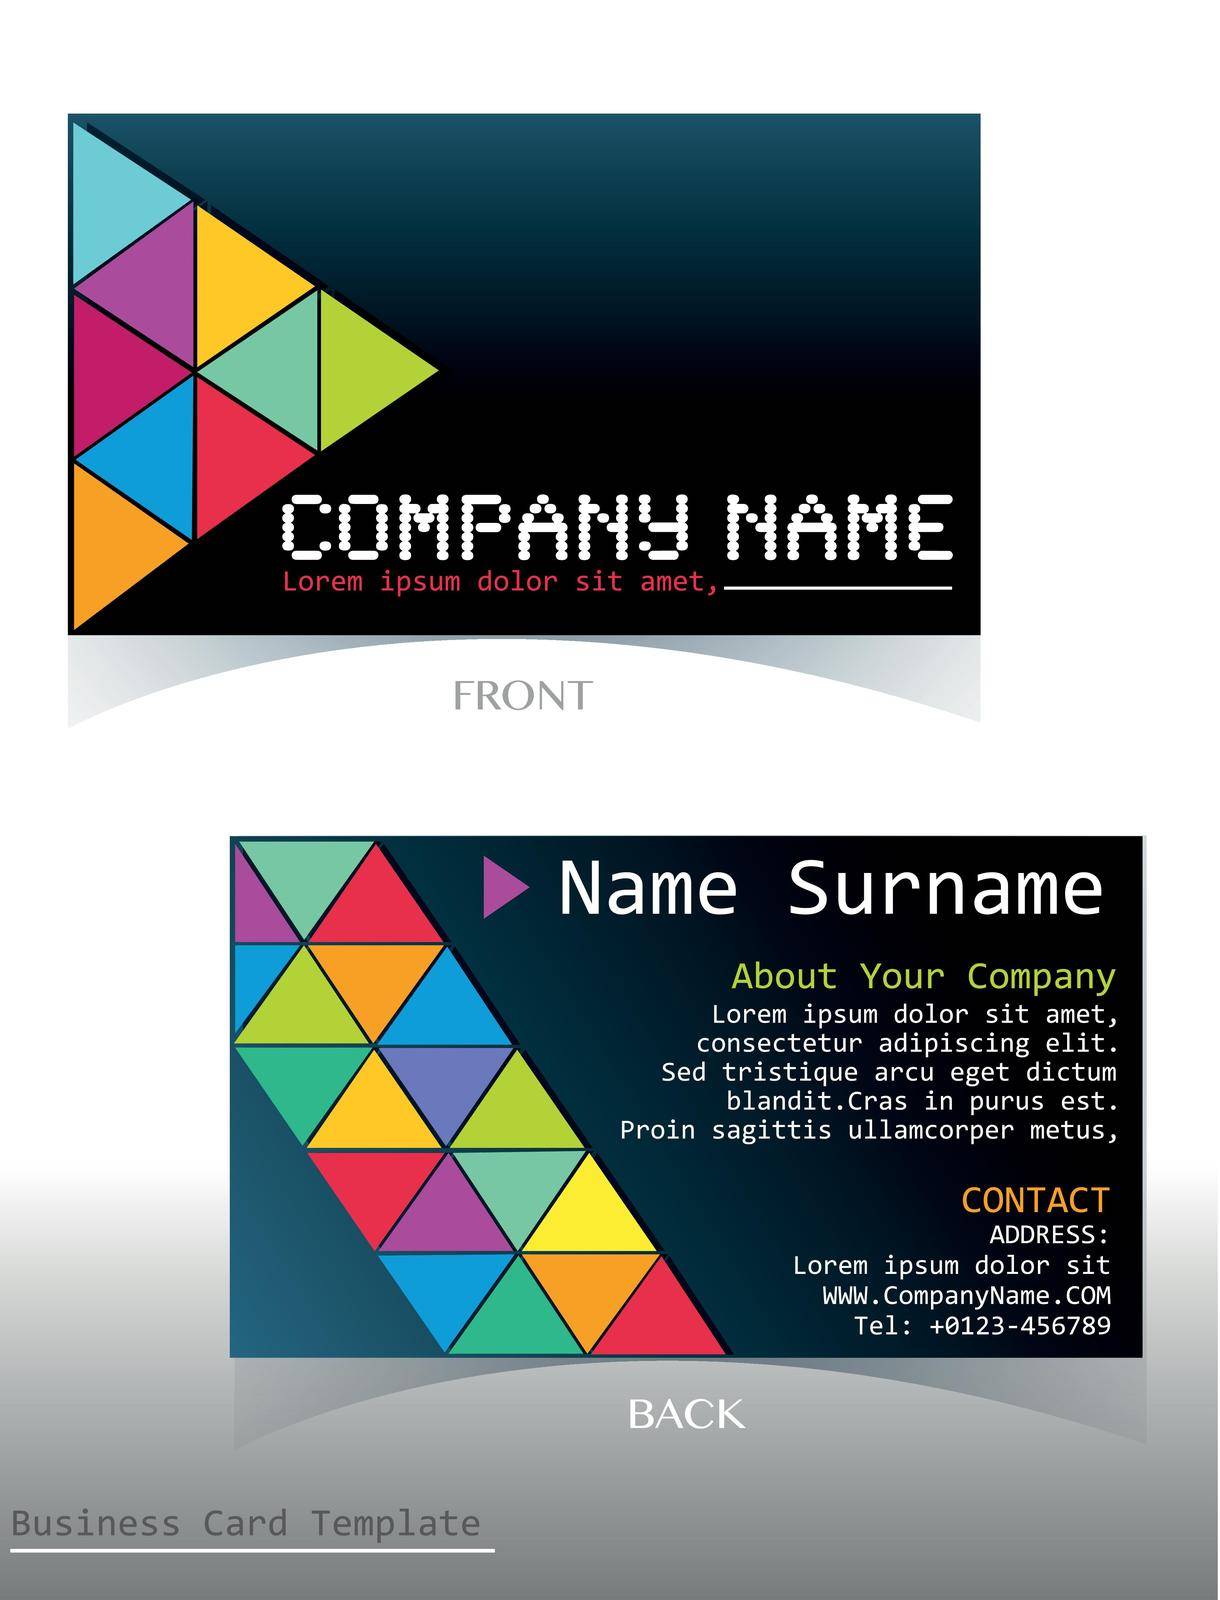 Business card by iimages